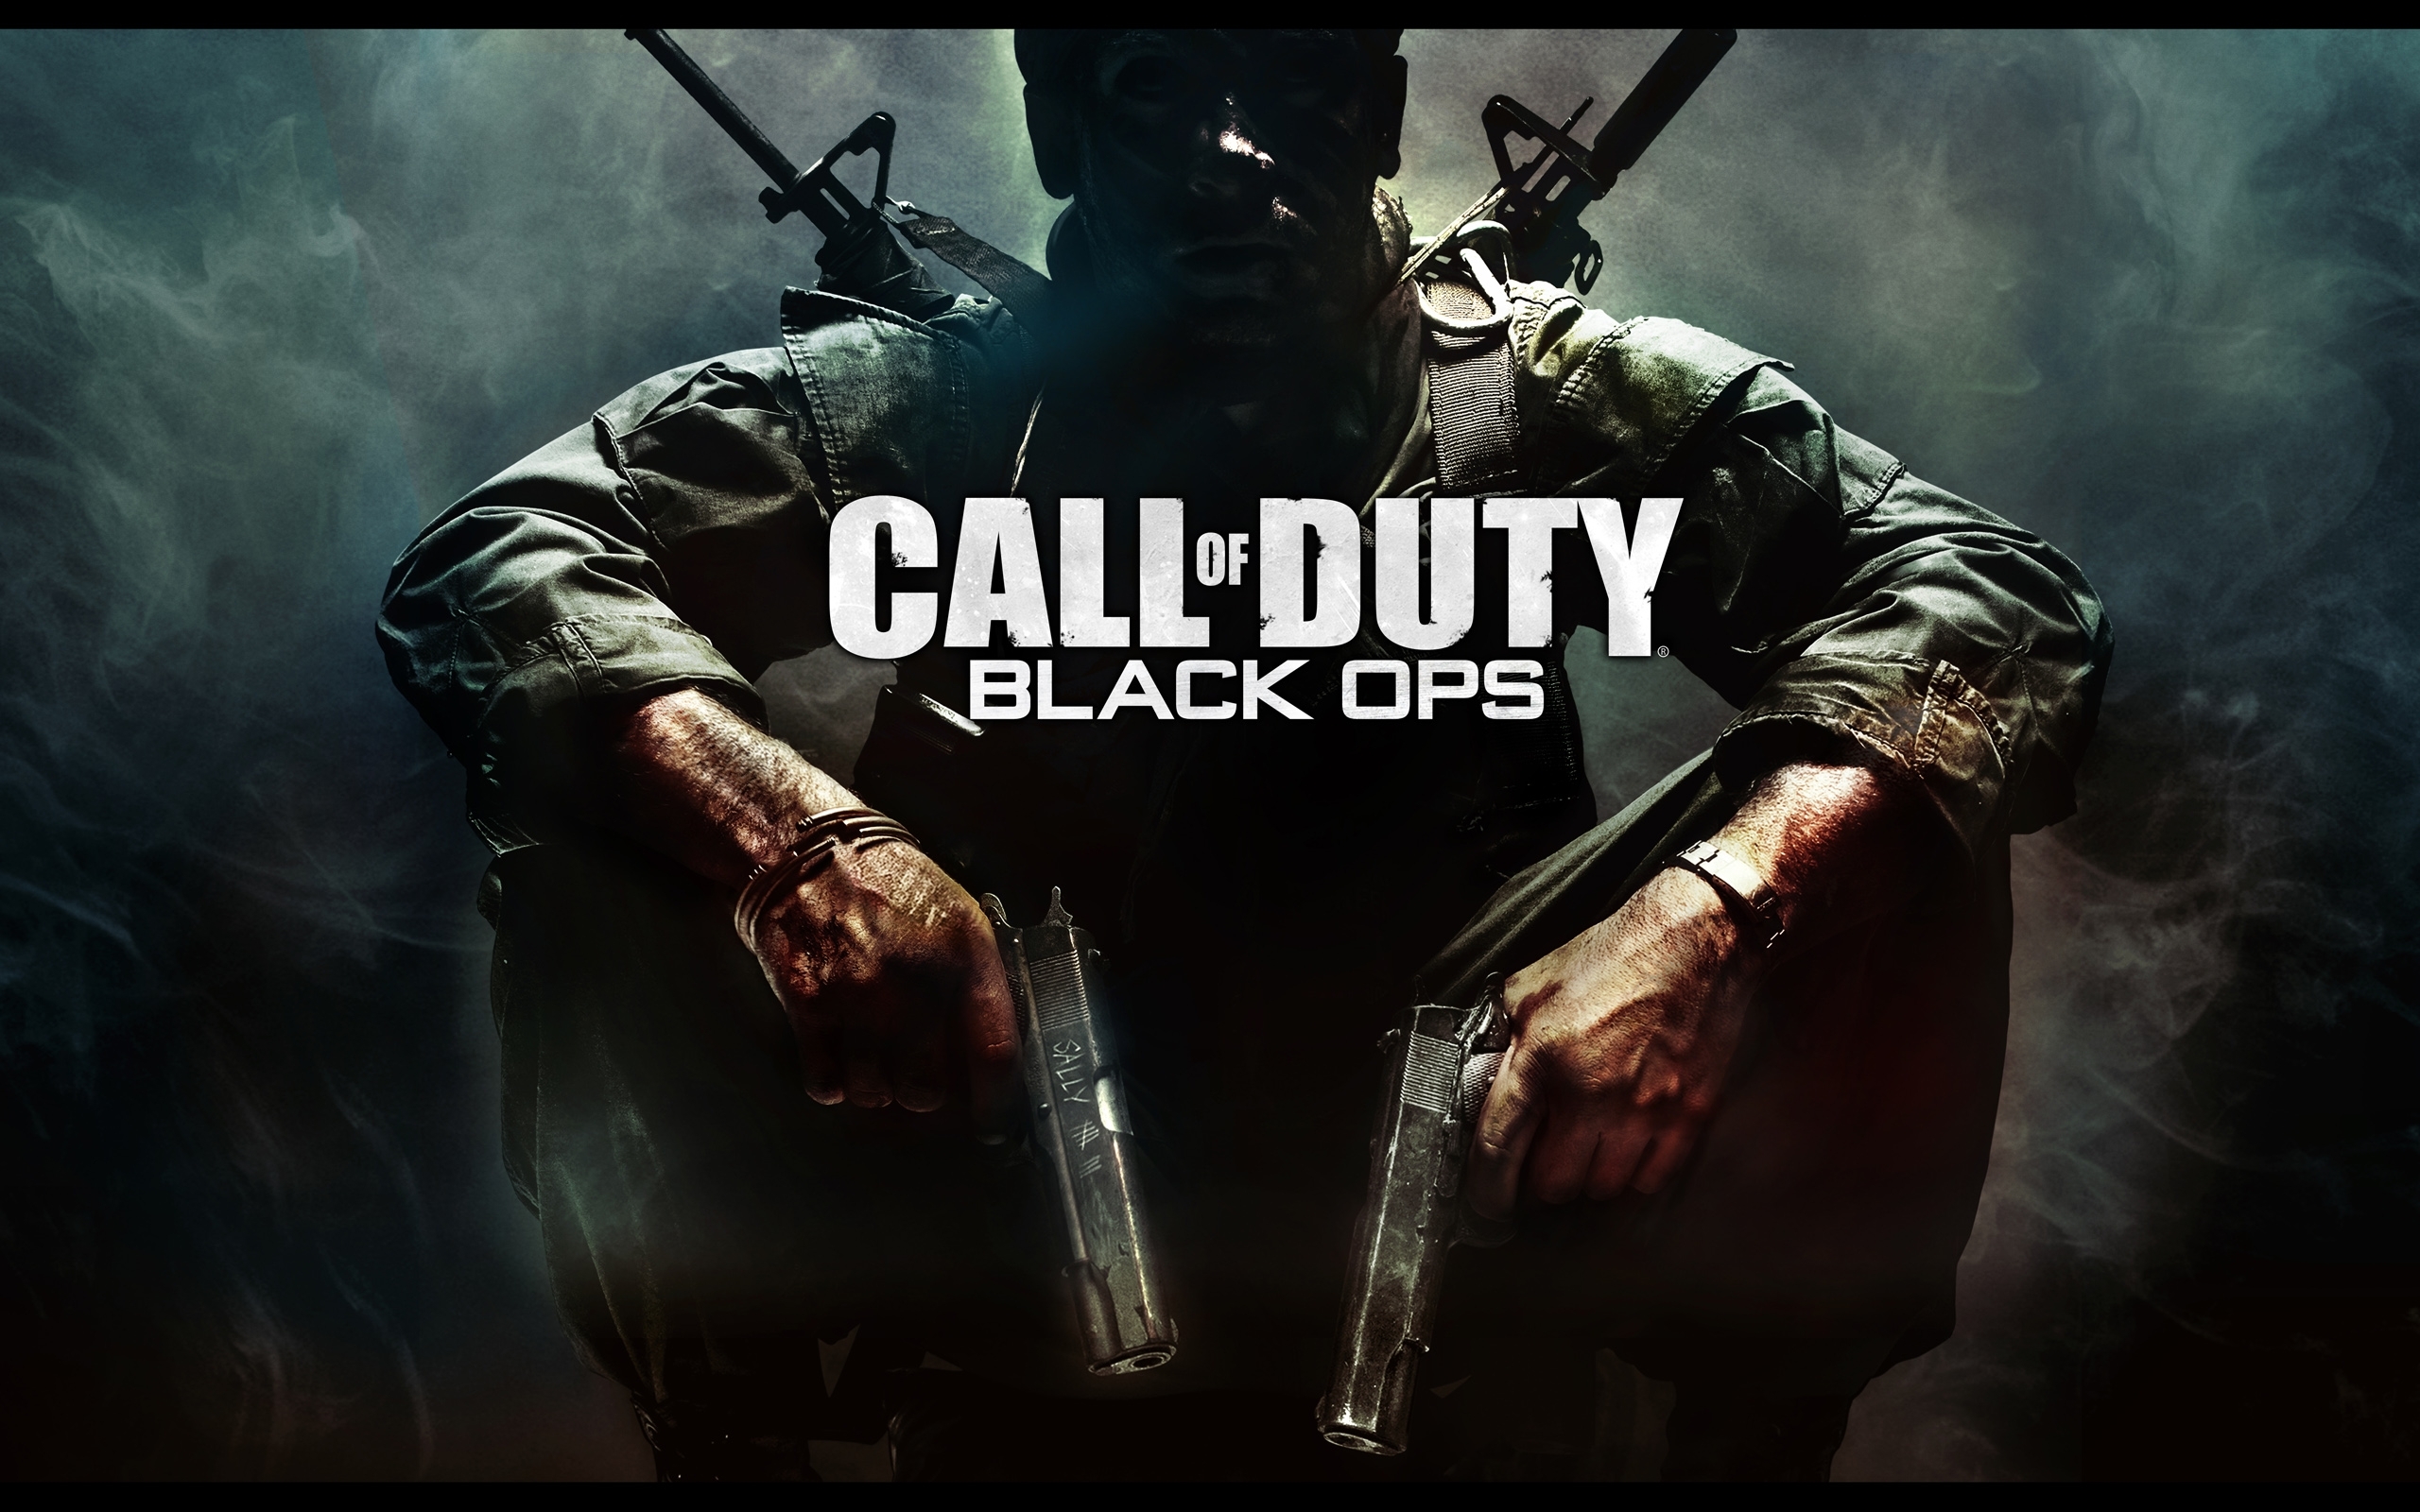 call of duty 4 black ops xbox one